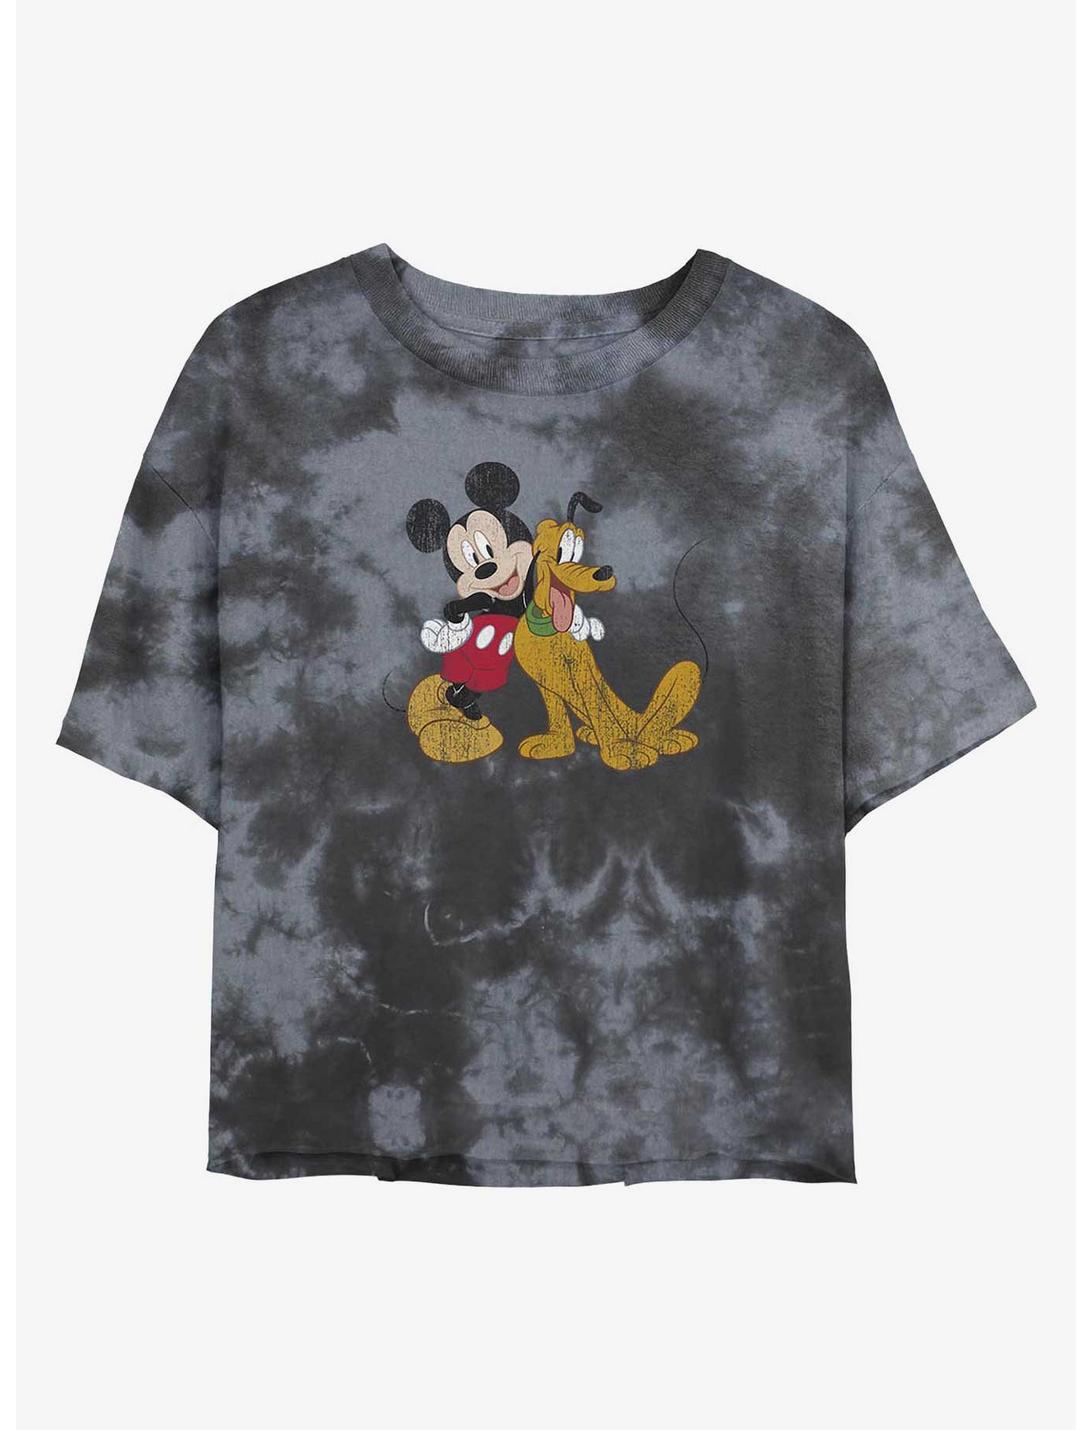 Disney Mickey Mouse Mickey and Pluto Tie-Dye Girls Crop T-Shirt, BLKCHAR, hi-res